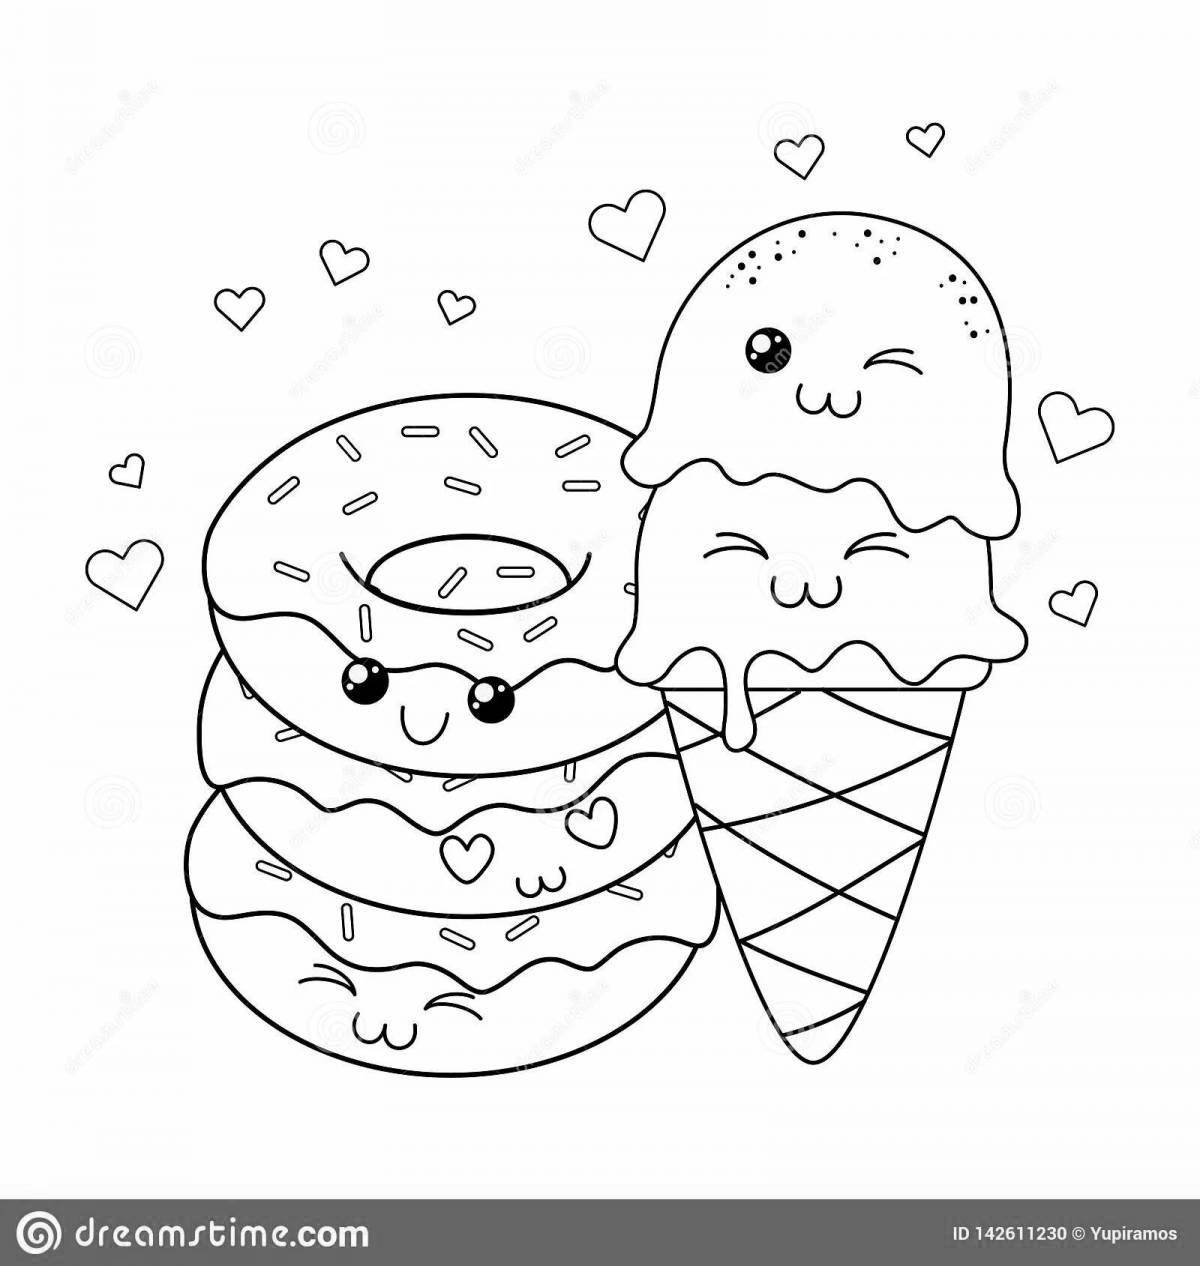 Naughty ice cream cat coloring page